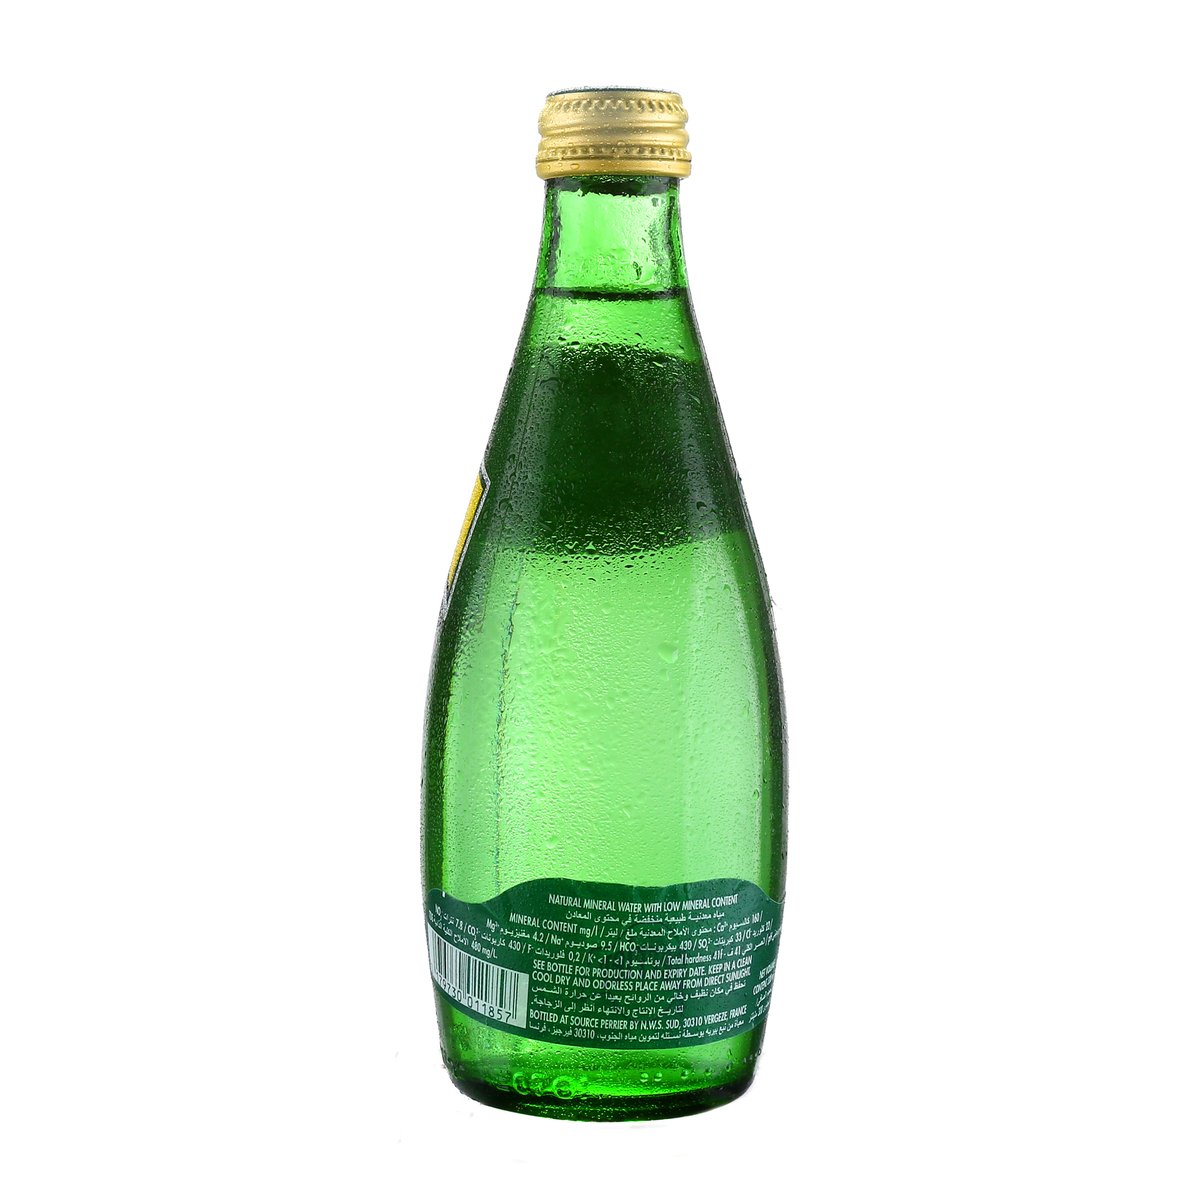 Perrier Natural Sparkling Mineral Water Regular 4 x 330 ml